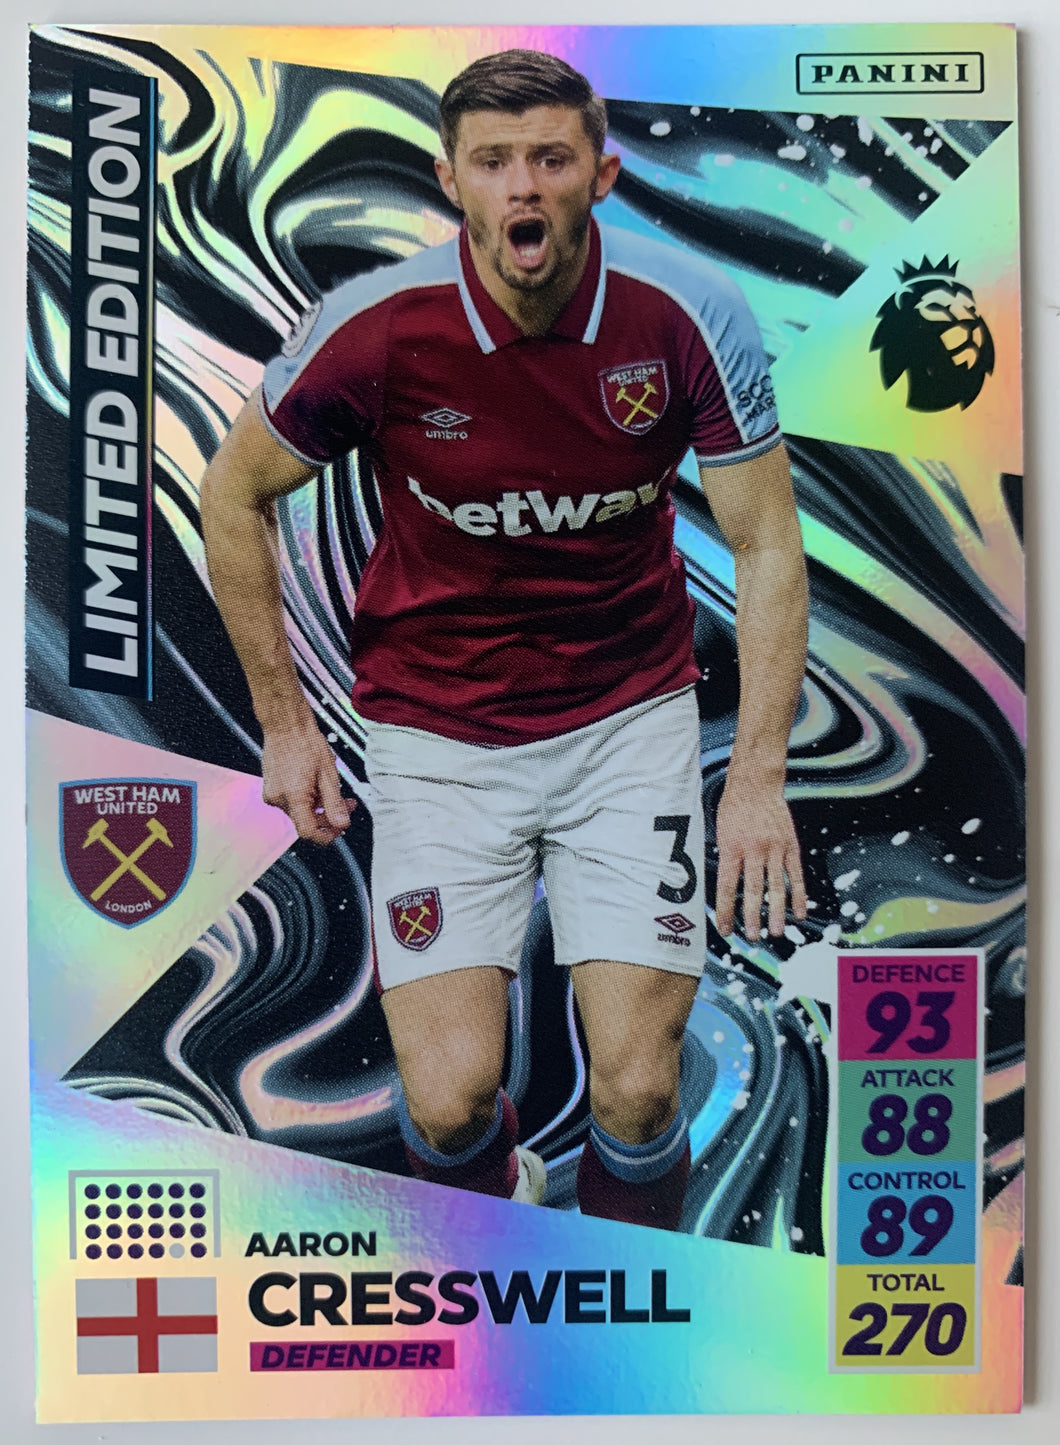 Panini Adrenalyn XL 2021/22 - Aaron Cresswell - Limited Edition